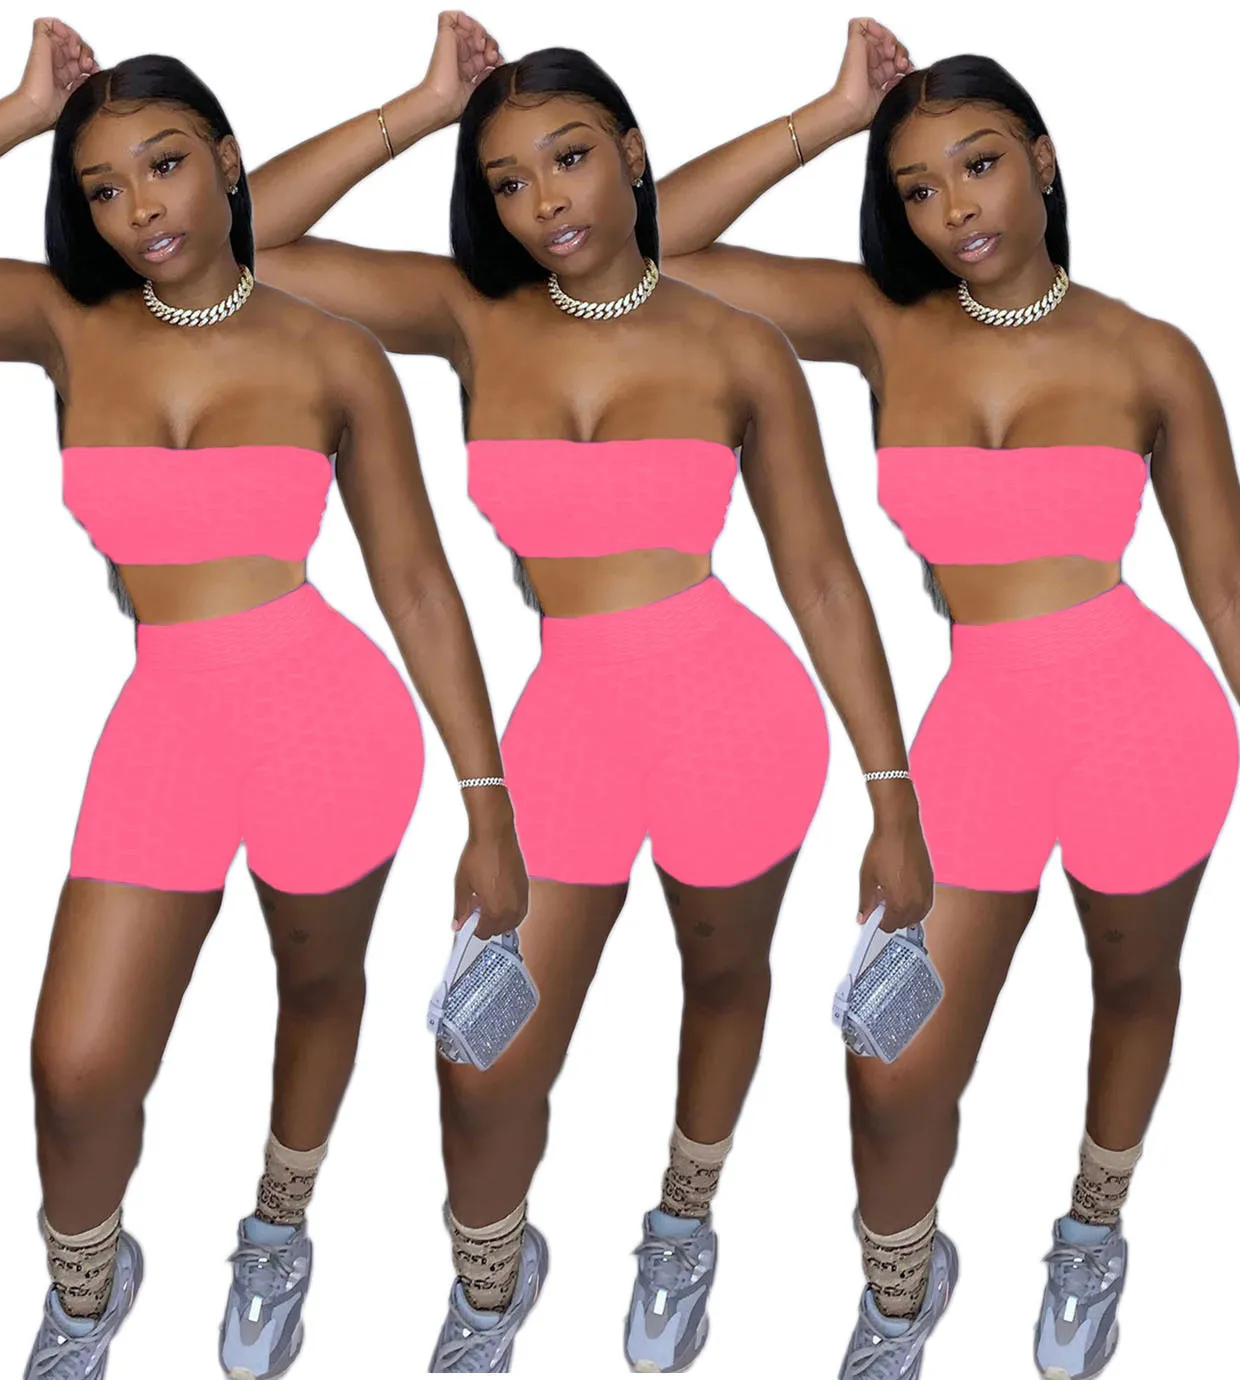 Women Tracksuits short set Yoga Outfits Tight Sexy Strapless Top Small Bra Shorts Leisure Sports High Elasticity Suit